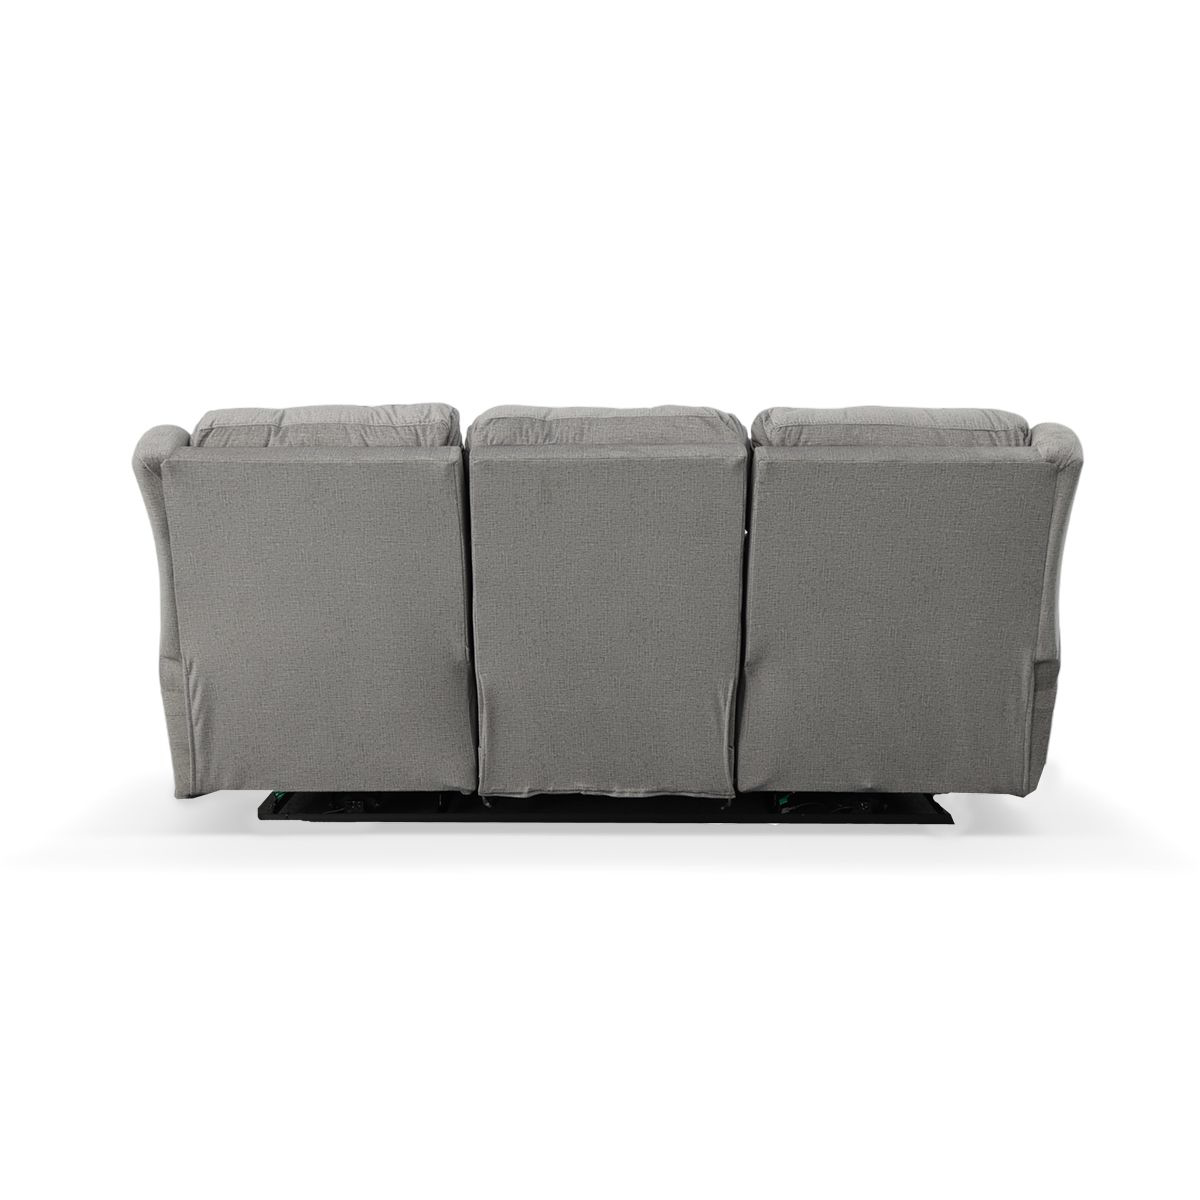 Picture of SHIMMER DBL RECL SOFA W/PHR